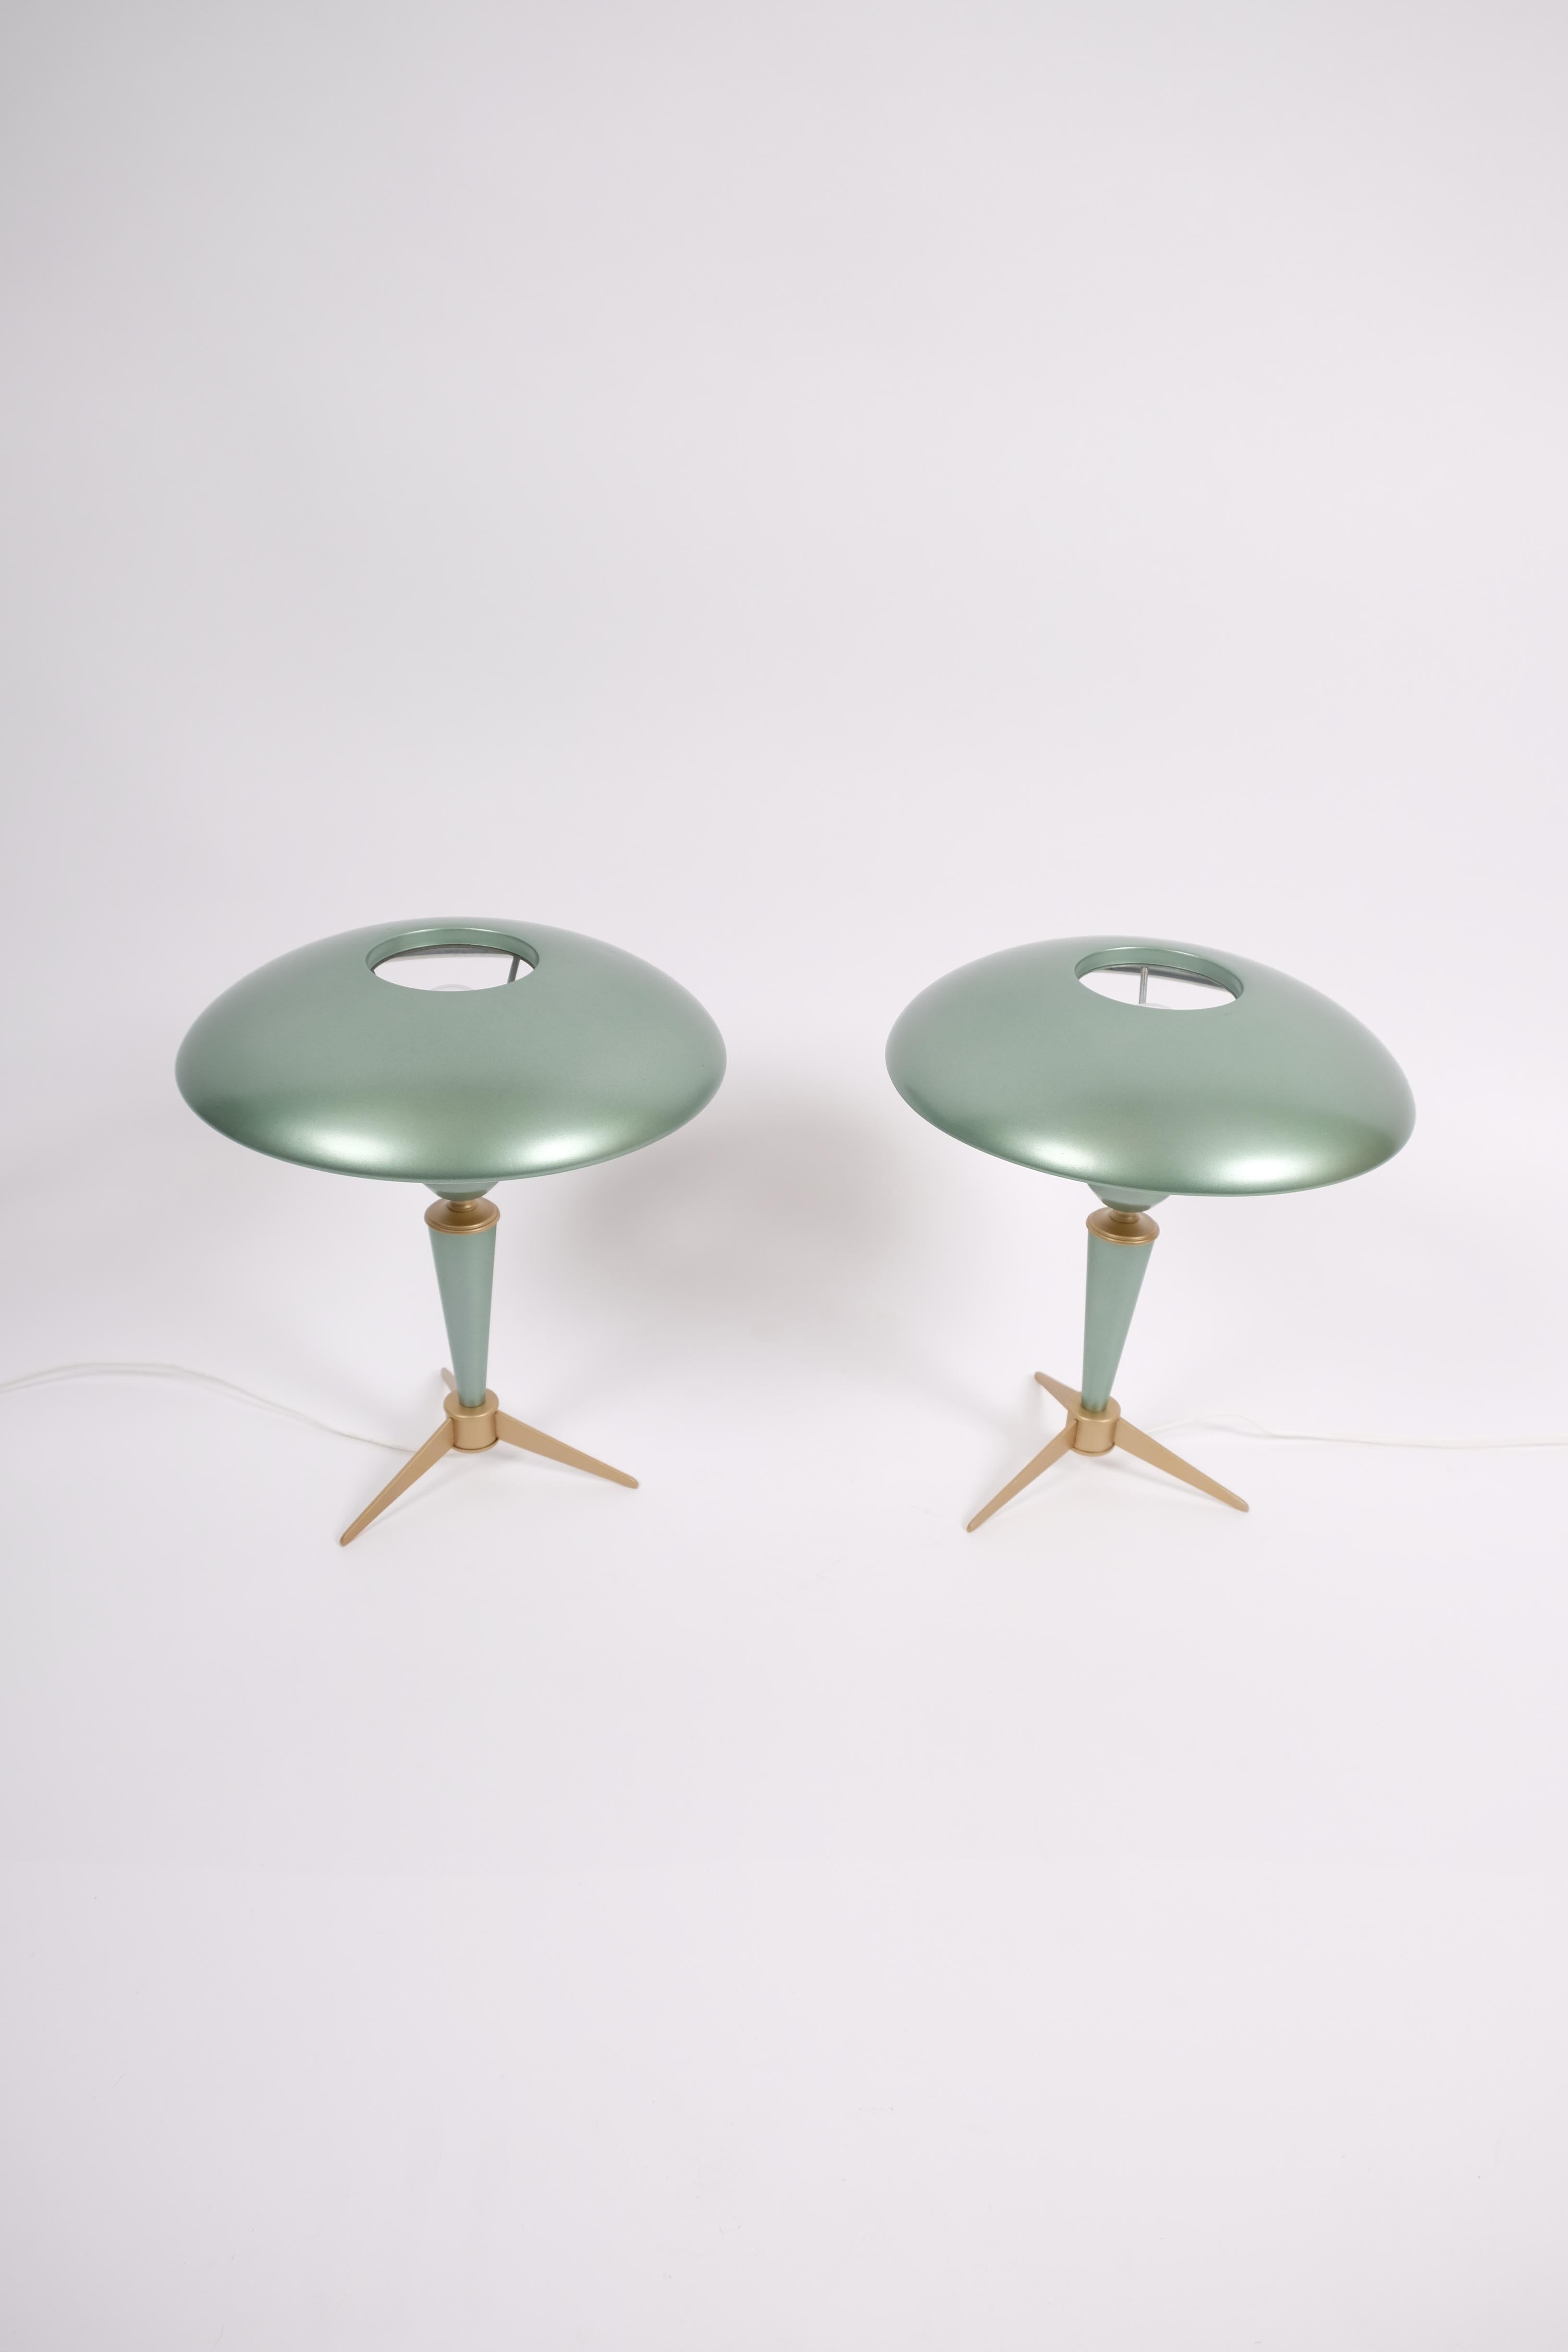 Wonderful pair of Bijou table lamps by Louis Kalff.
Both lamps have been proffesionally relacquered in light green metalic and rewired.
One of the lamps still have the original label.
The lamps have minimal soft dents - see last picture.